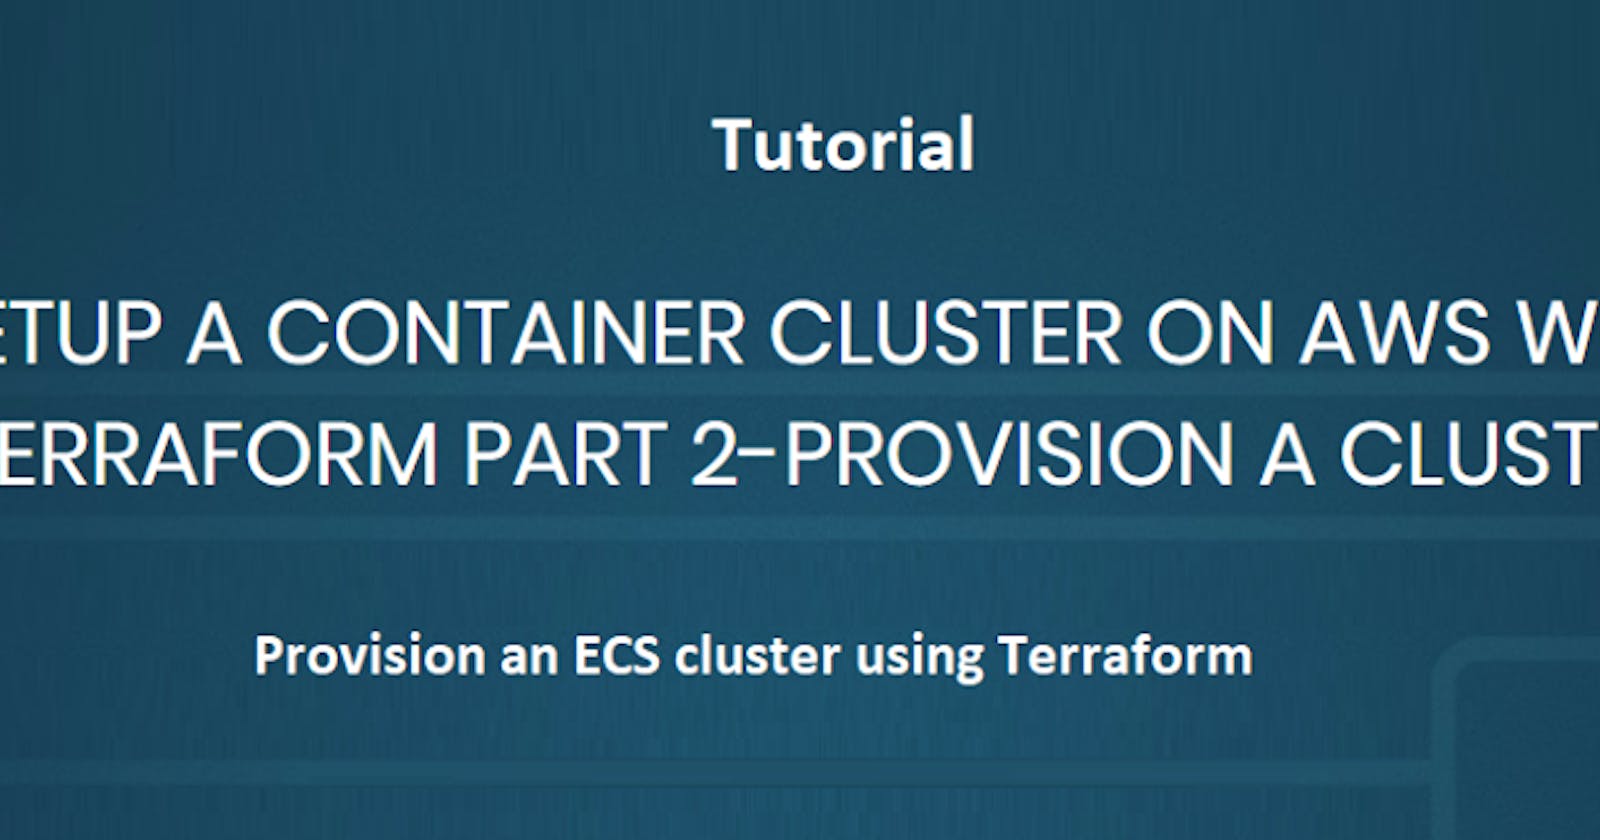 [Tutorial] How to provision an ECS cluster and run a service on it